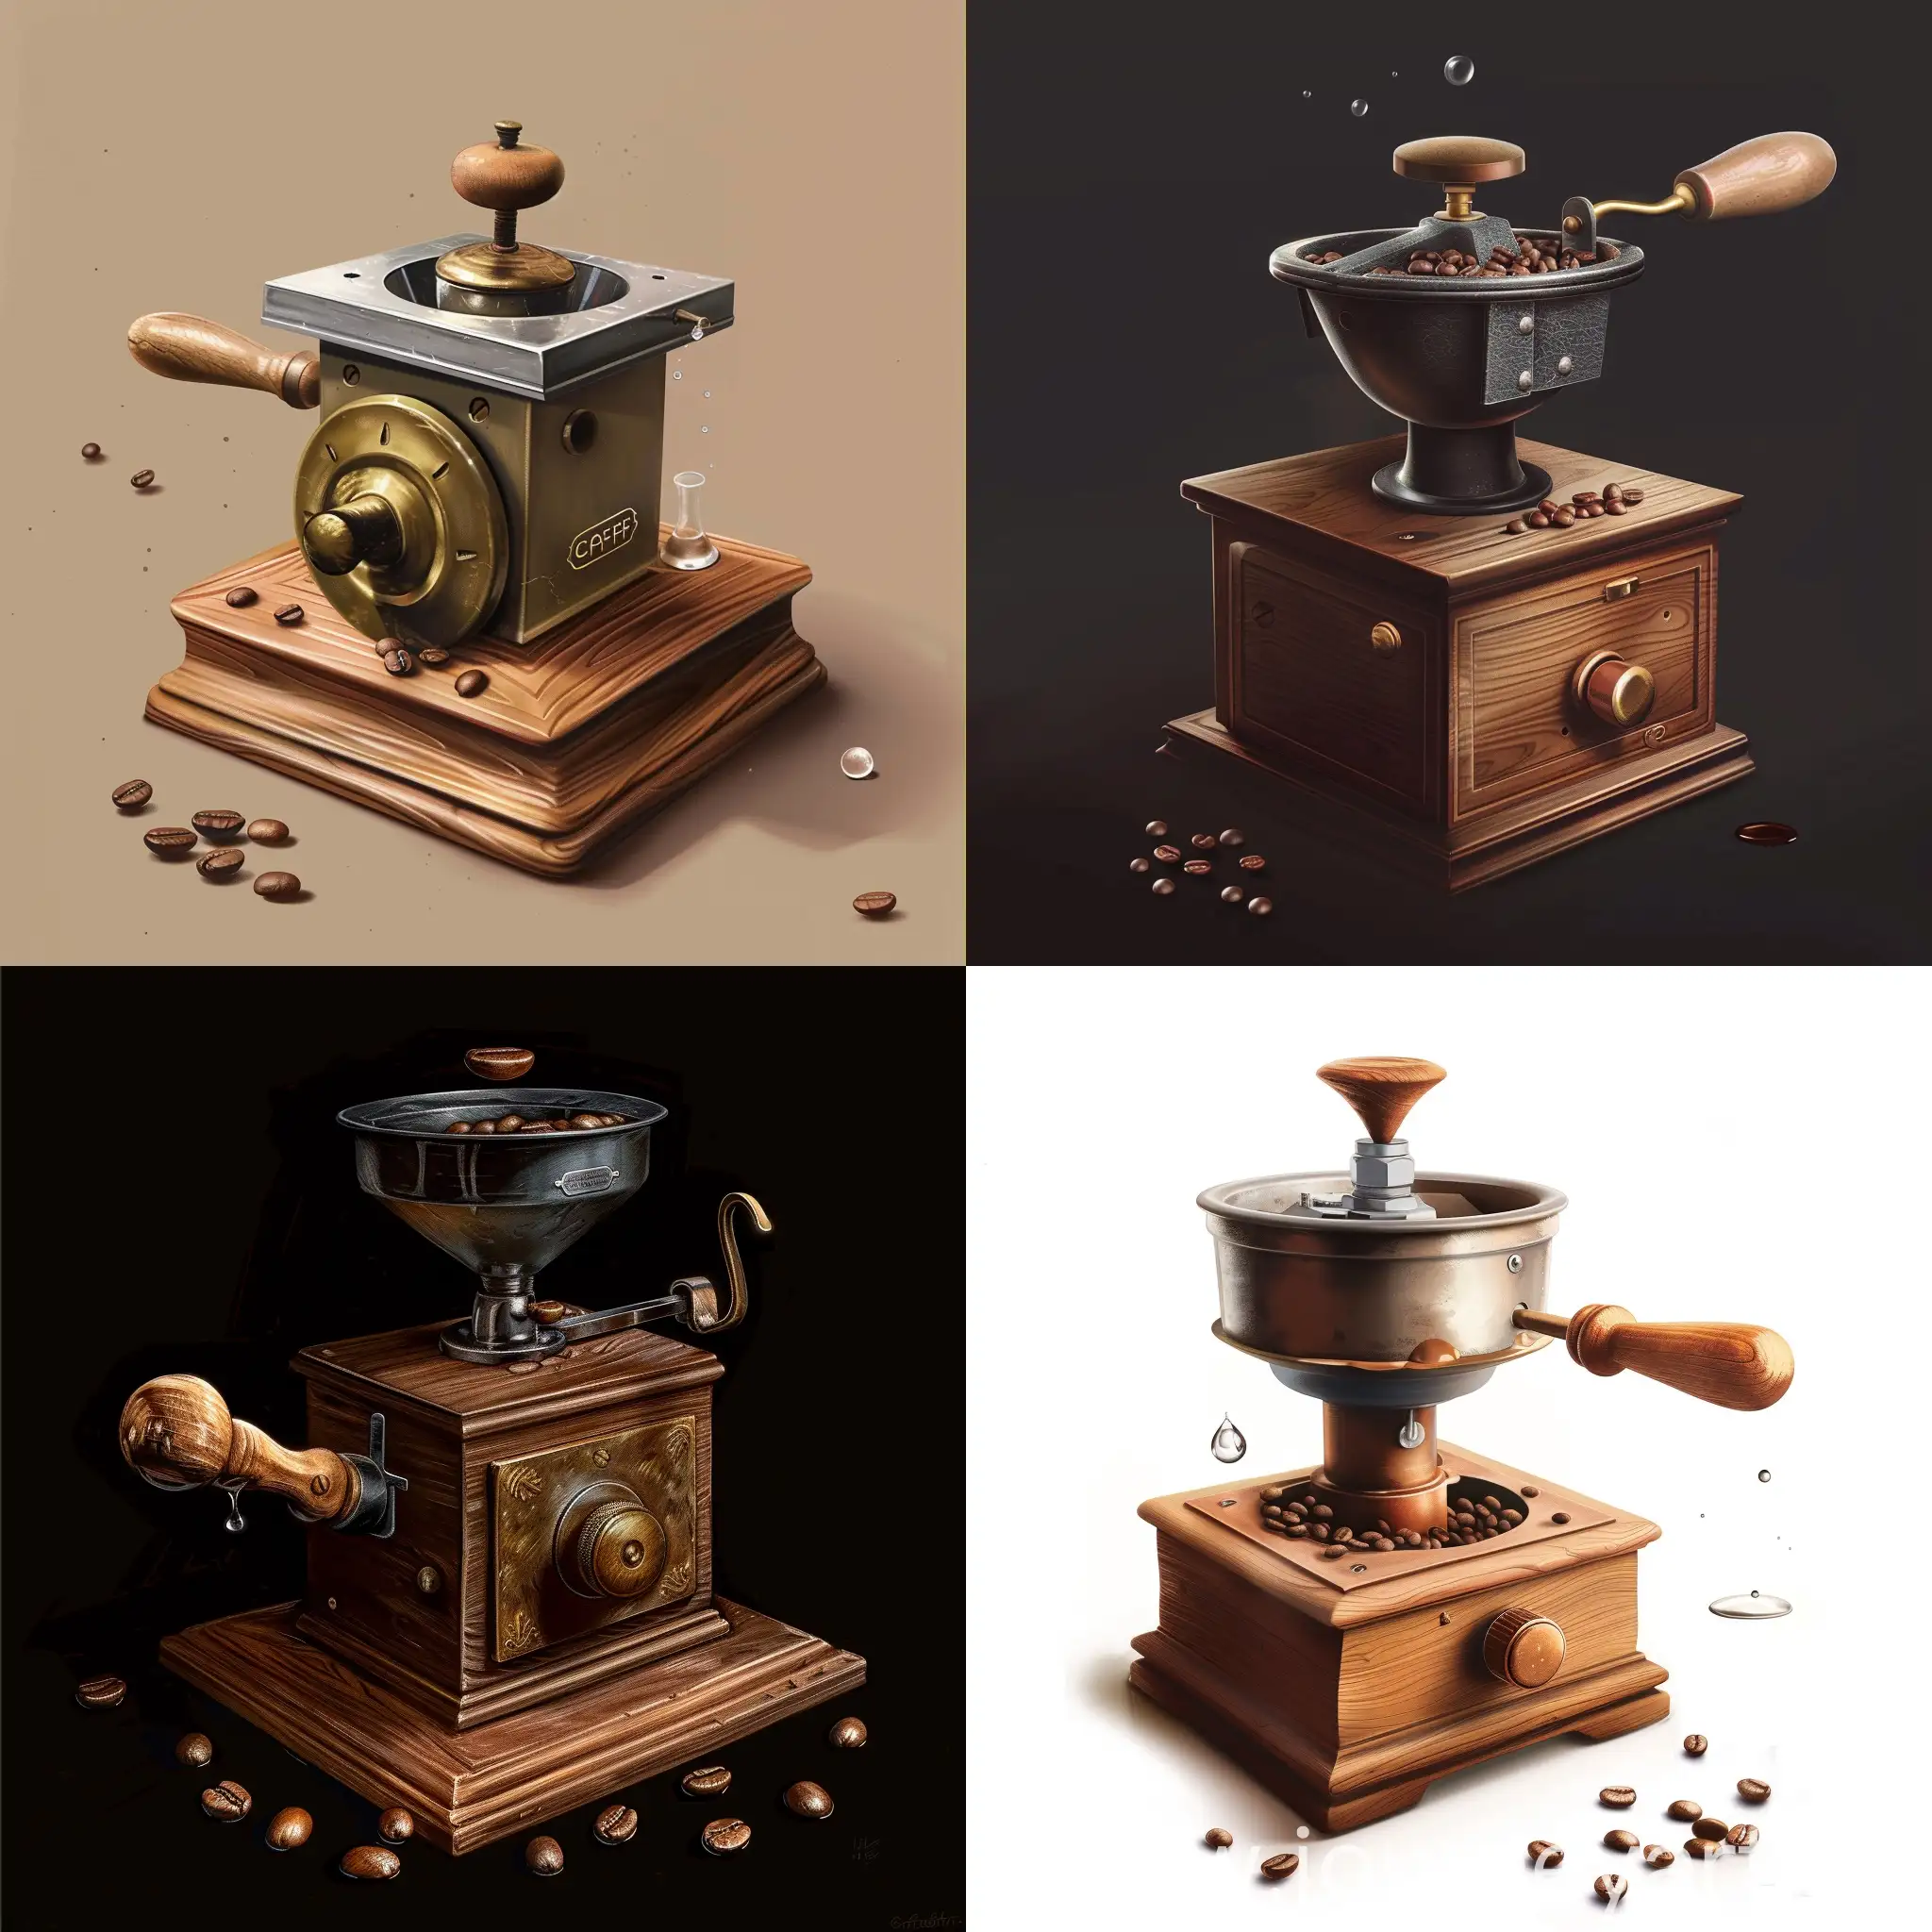 Vintage-Wooden-Manual-Coffee-Grinder-with-Bronze-Details-and-Coffee-Beans